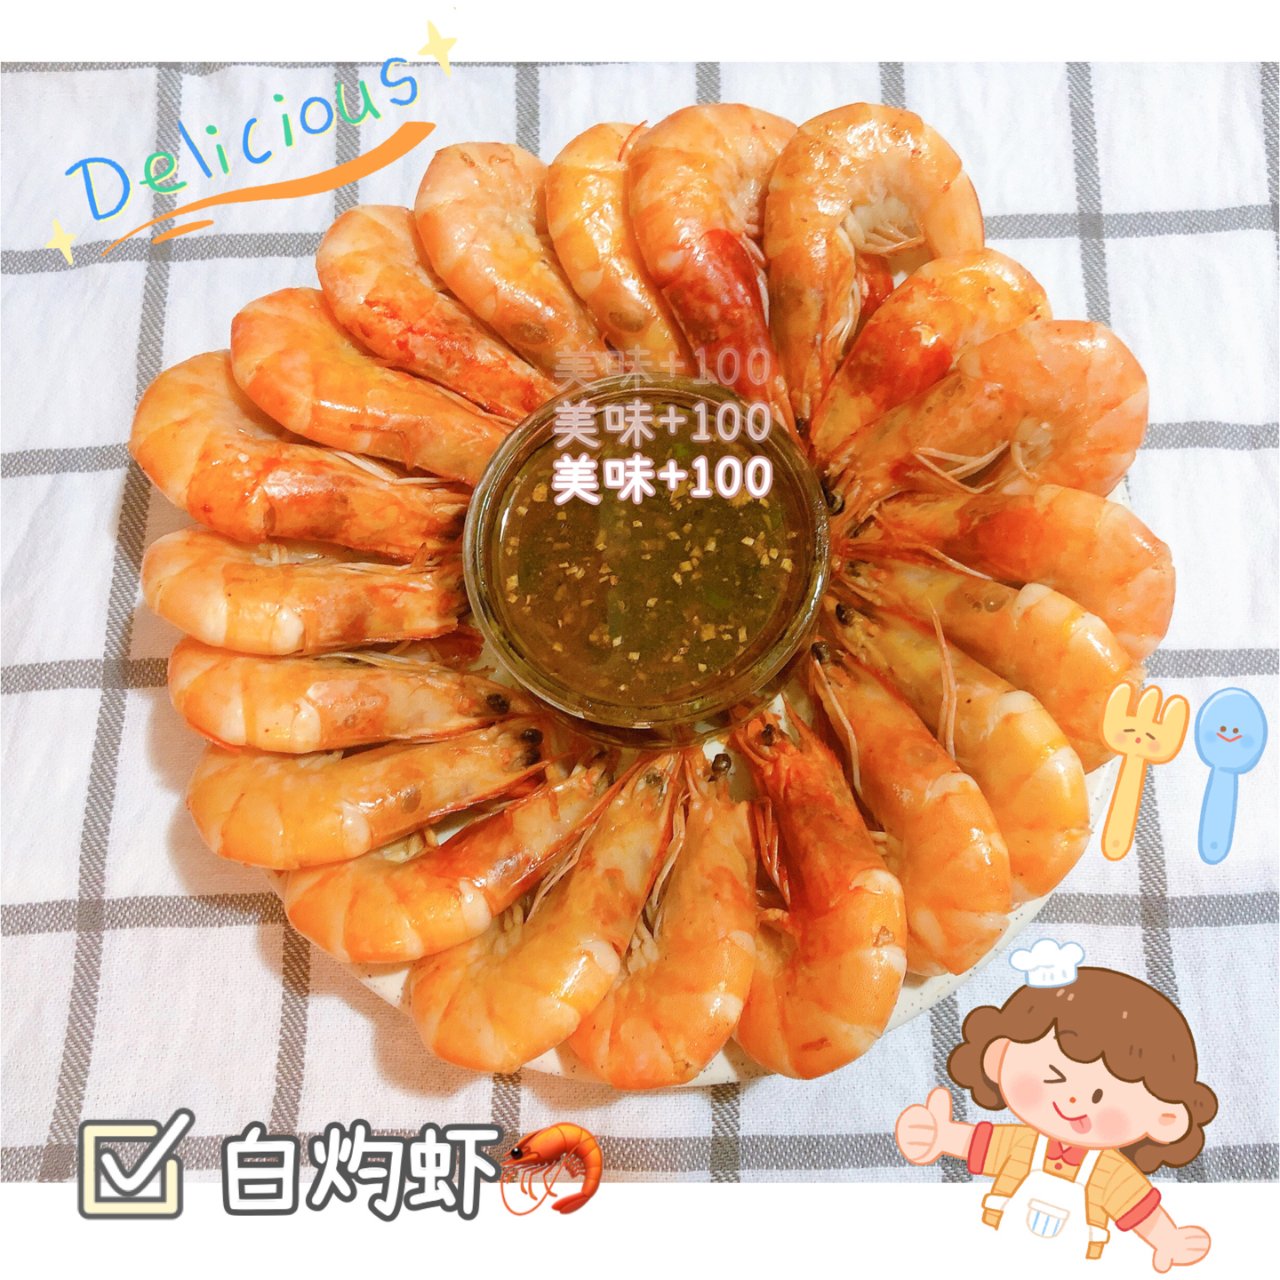 Wellsley Farms Colossal Uncooked Shrimp,